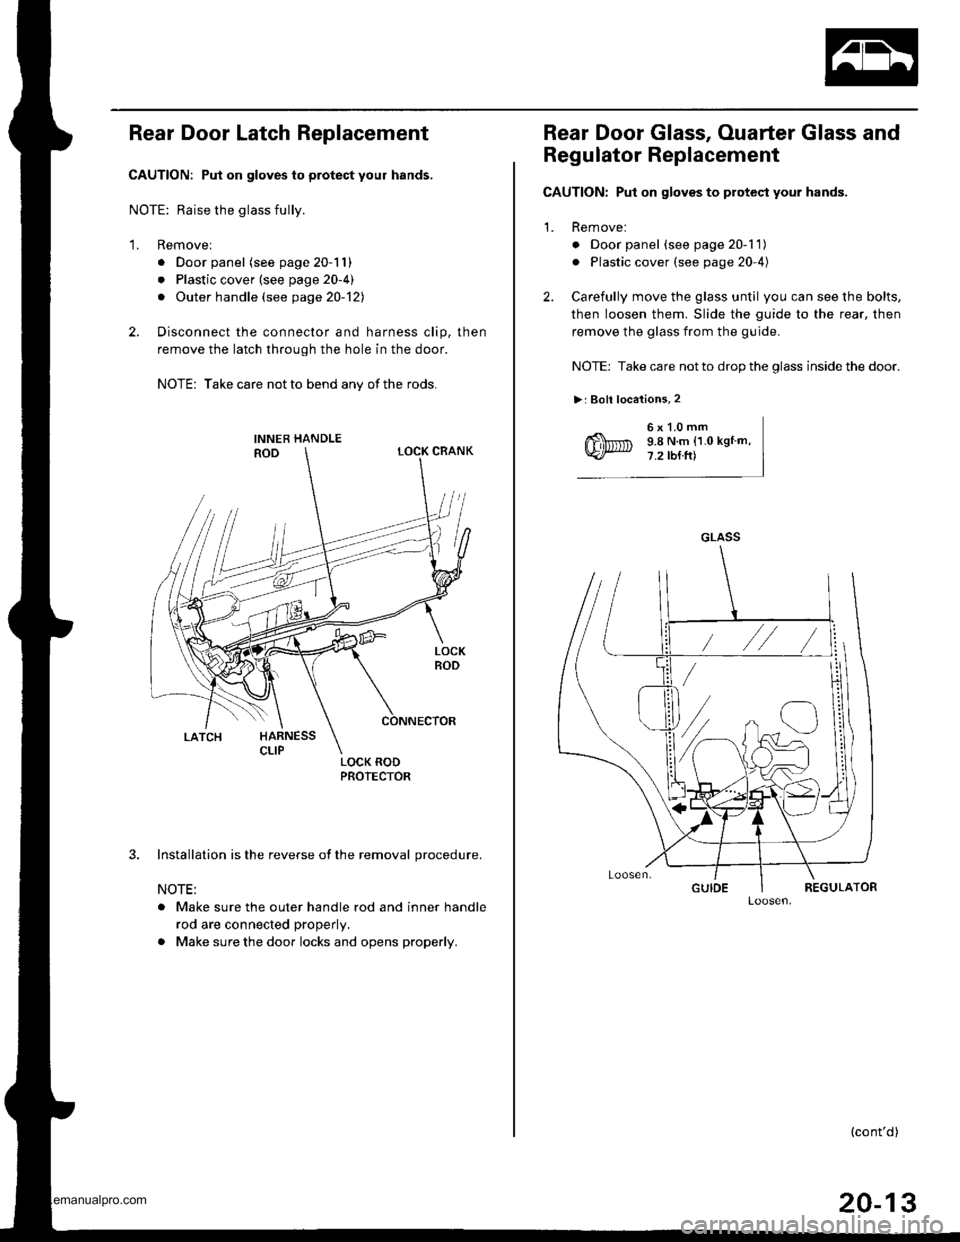 HONDA CR-V 1999 RD1-RD3 / 1.G Workshop Manual 
Rear Door Latch Replacement
CAUTION: Put on gloves to protect your hands,
NOTE: Raise the glass fully.
1. Removel
. Door panel (see page 20-11)
. Plastic cover (see page 20-4)
. Outer handle (see pag